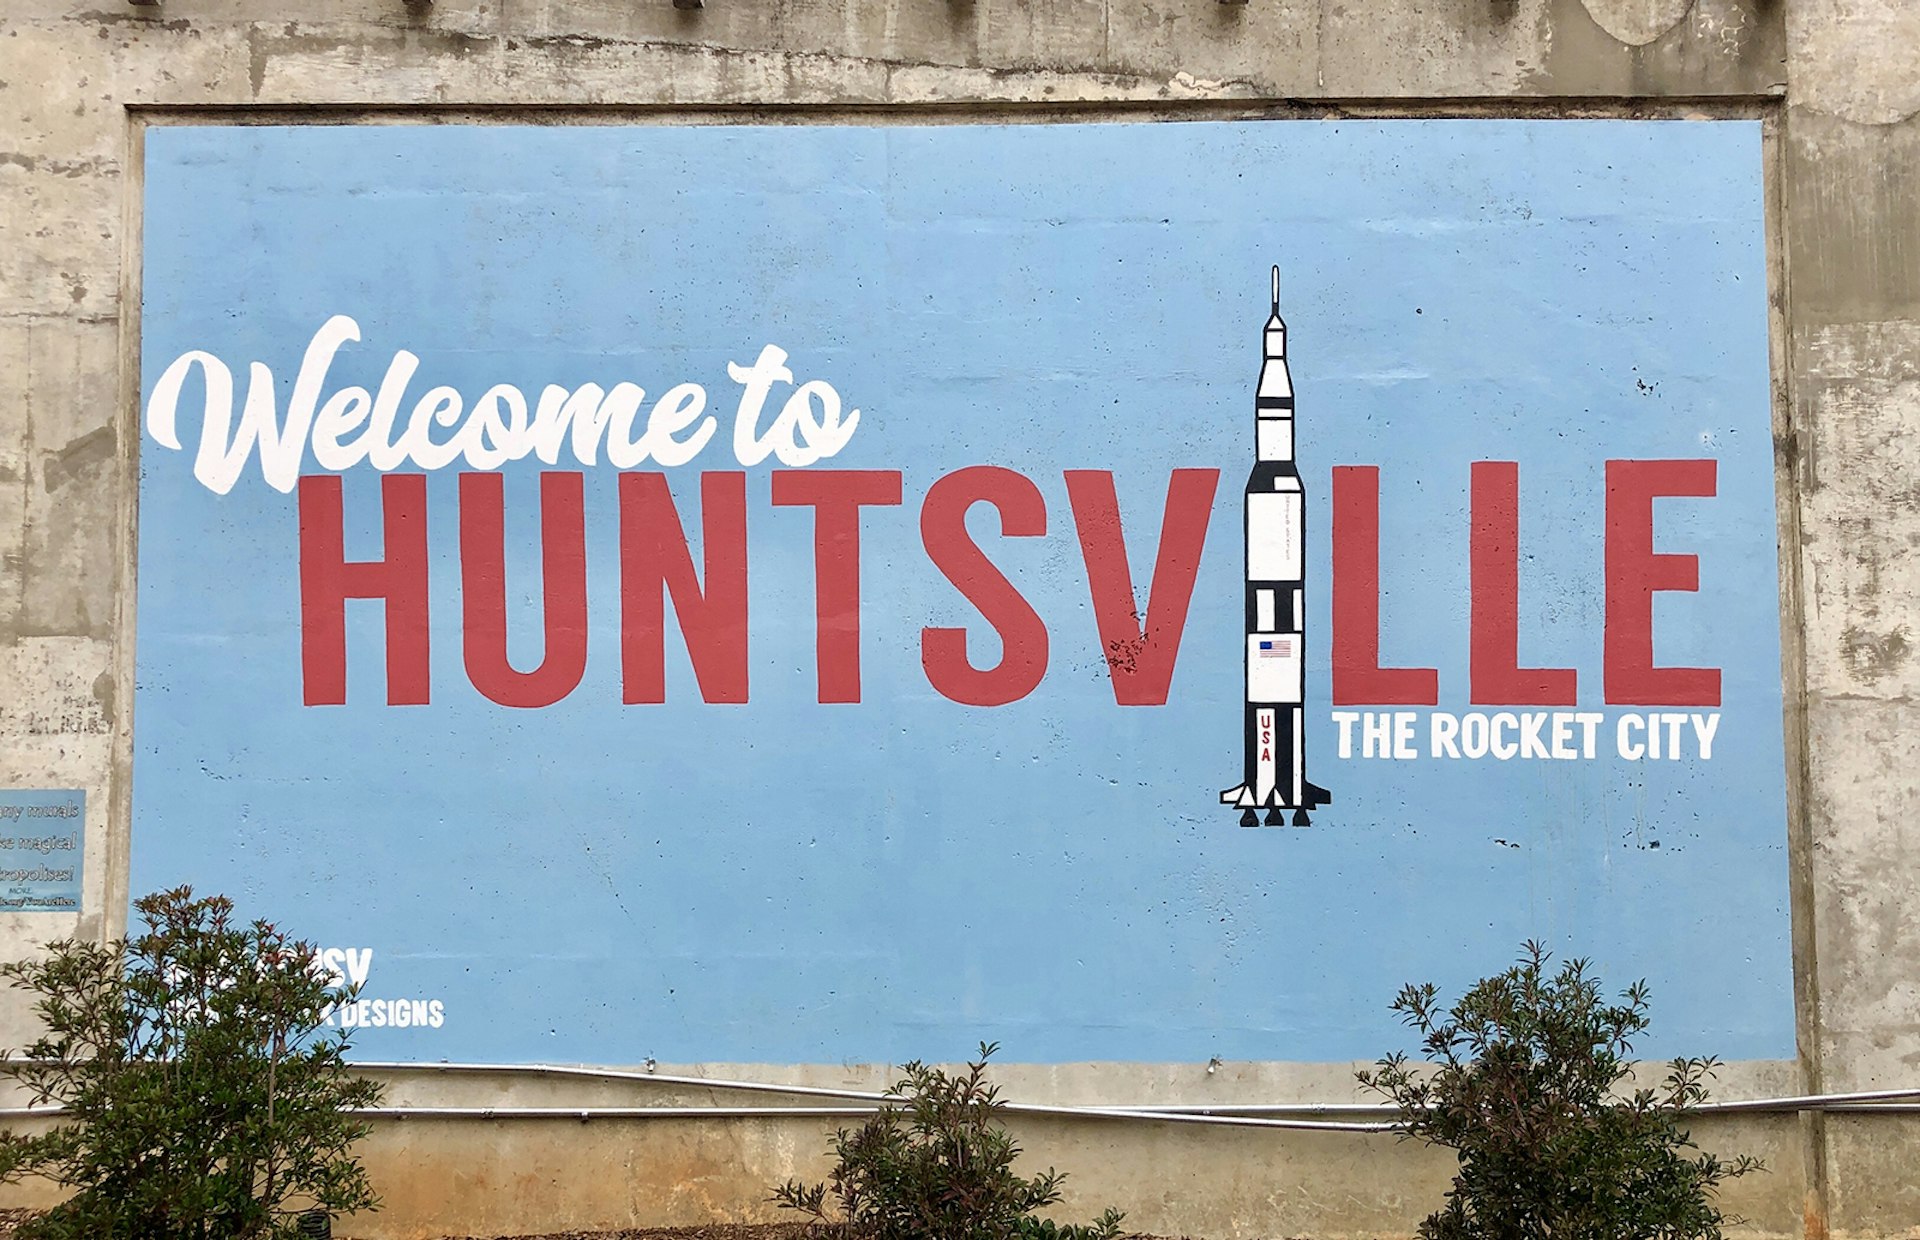 Mural with blue background that includes the text "welcome to Huntsville." The "I" in Huntsville is a rocket ship.